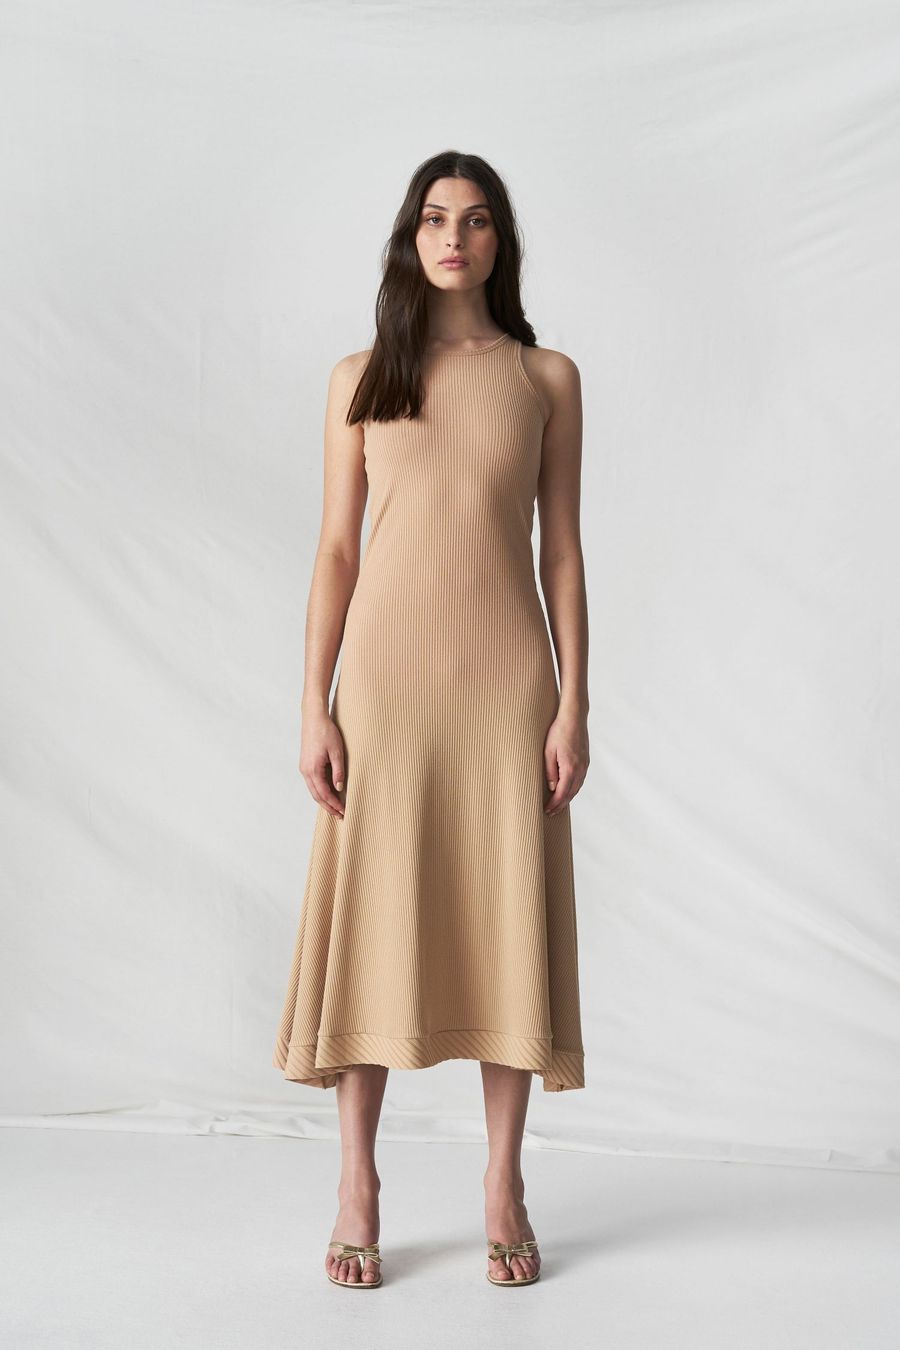 COURAGE AND ENDURANCE DRESS - CAMEL